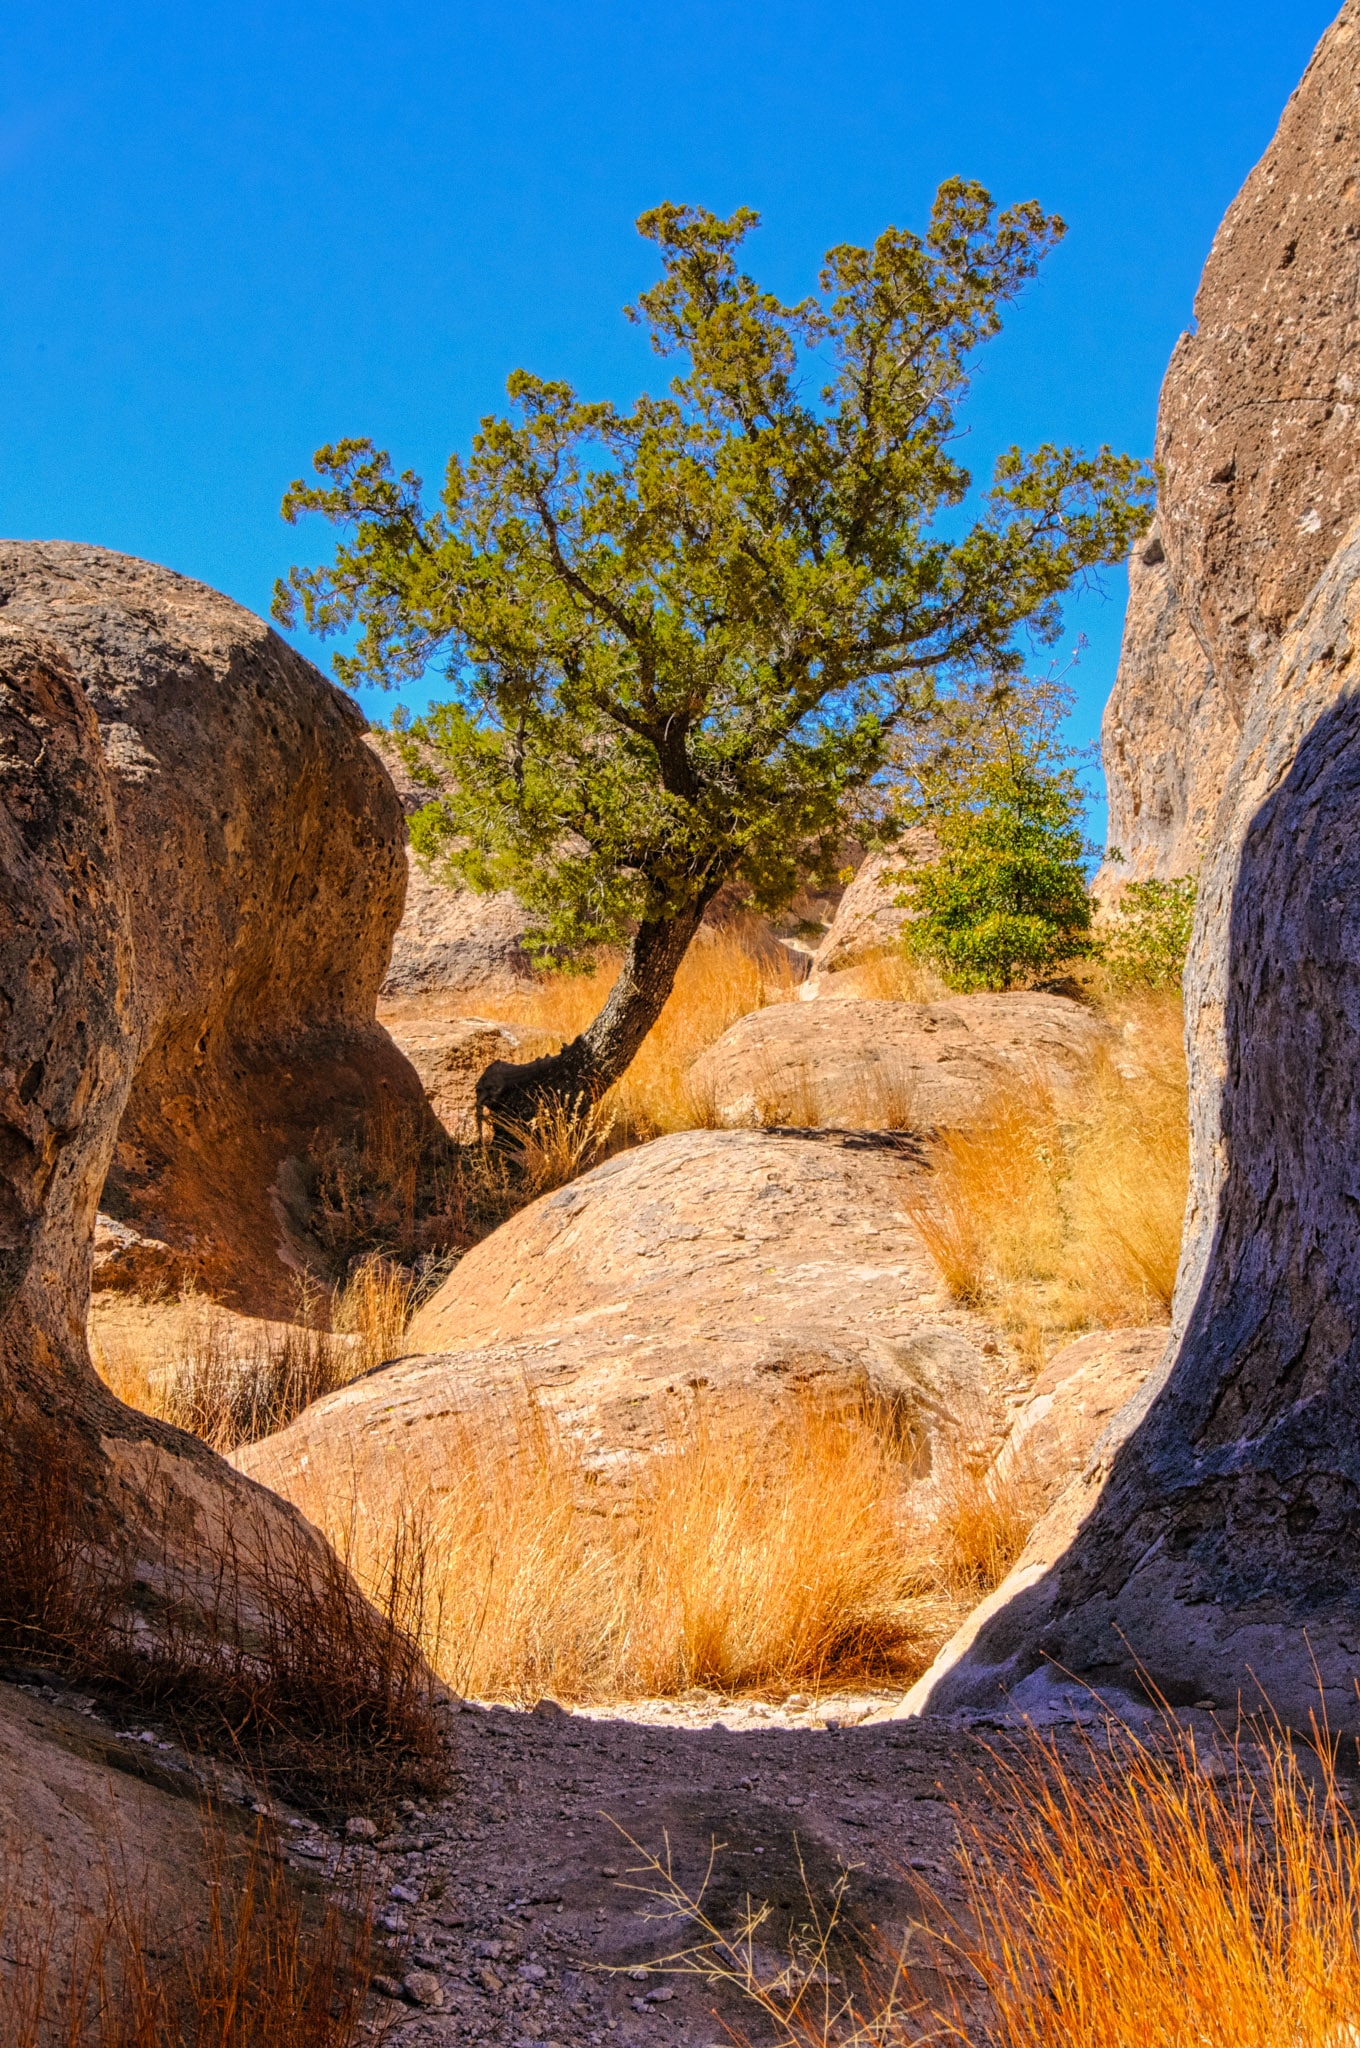 A juniper tree with aqn alligator skin trunk grows amongst the pinnacles in City of Rocks State Park between Deming and Silver City, New Mexico.